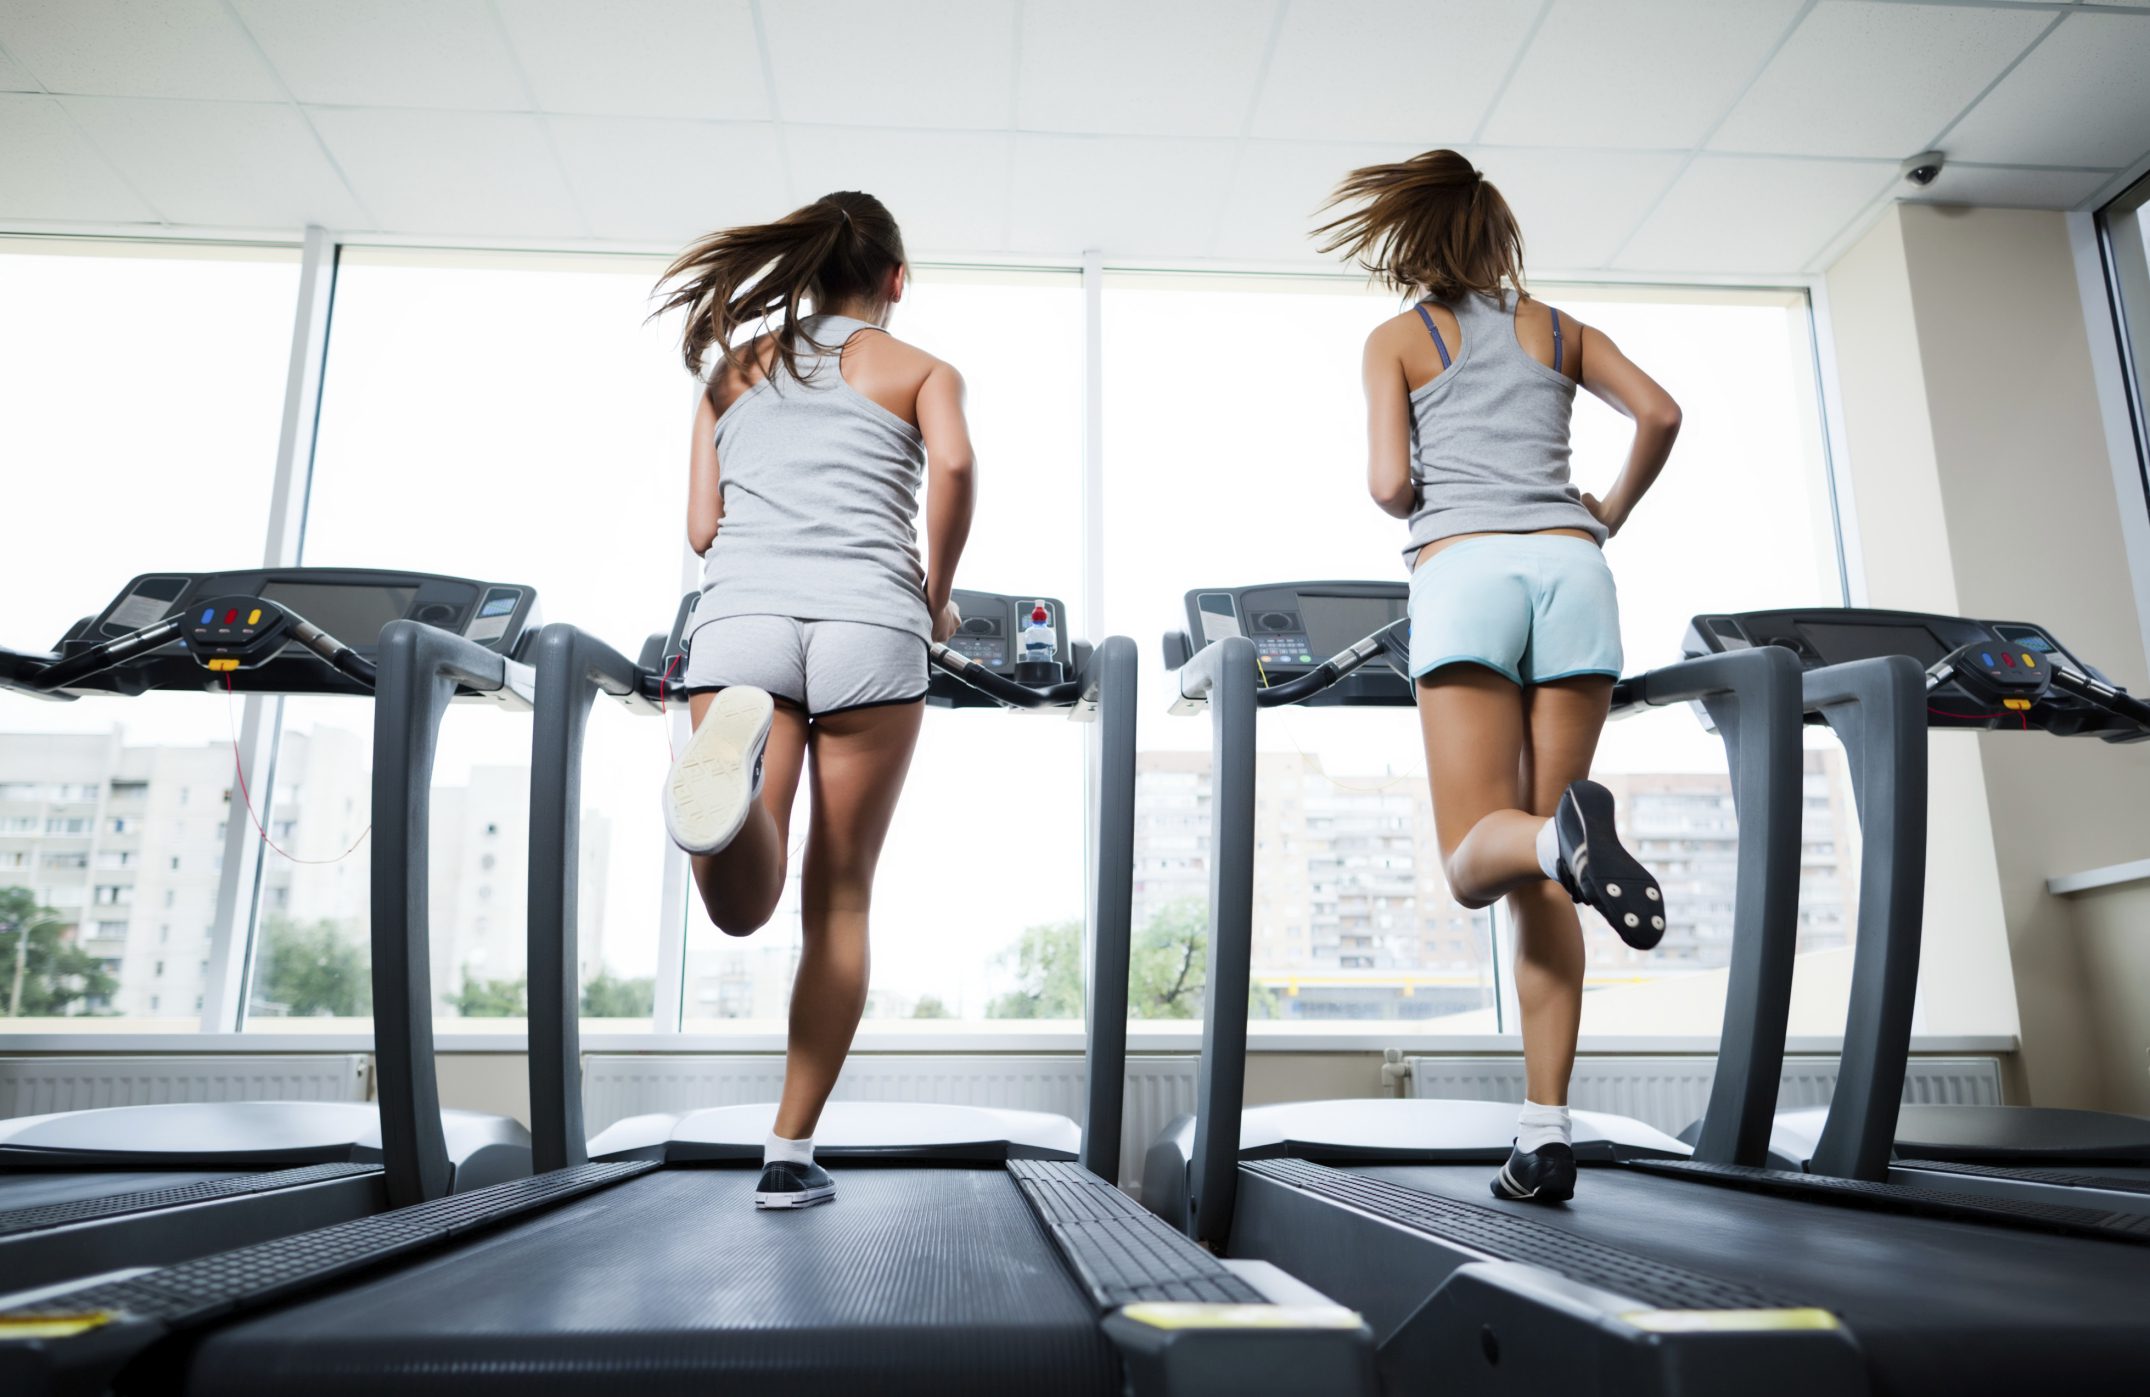 10 Exercises to Do on a Treadmill That Aren't Running - Fit